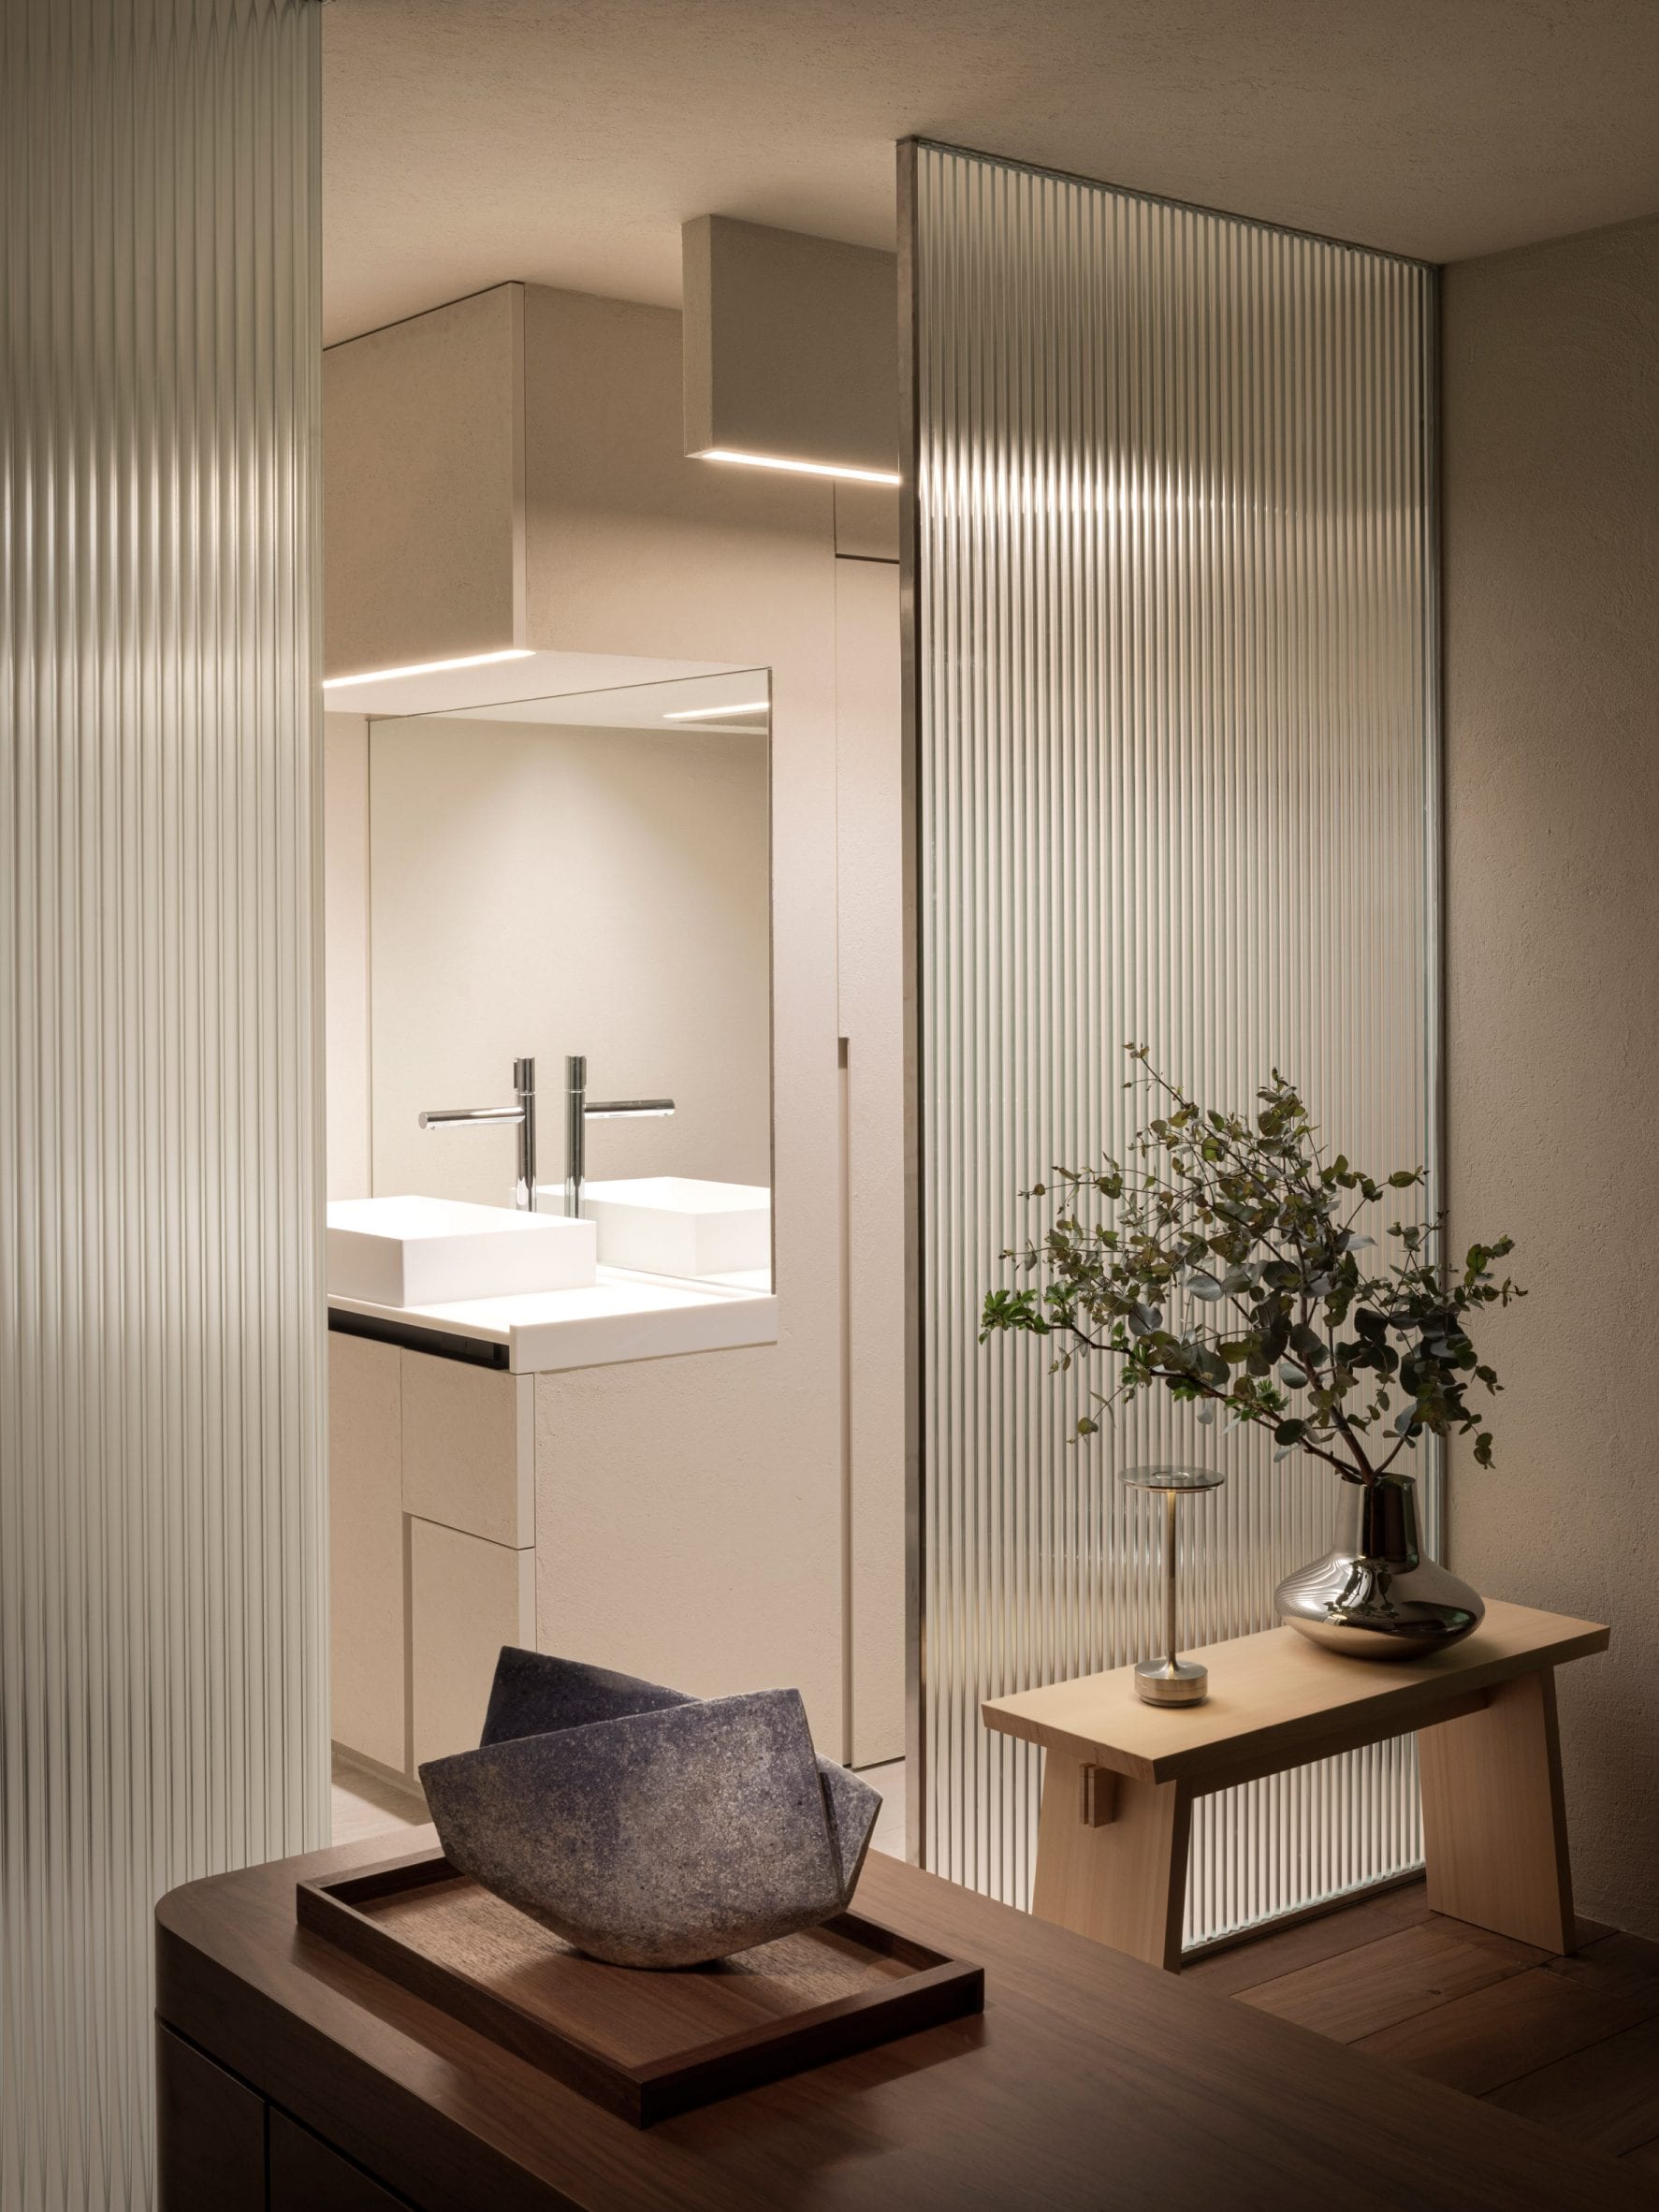 Bathroom entrance with glass walls and decorative vases in The Life concept apartment